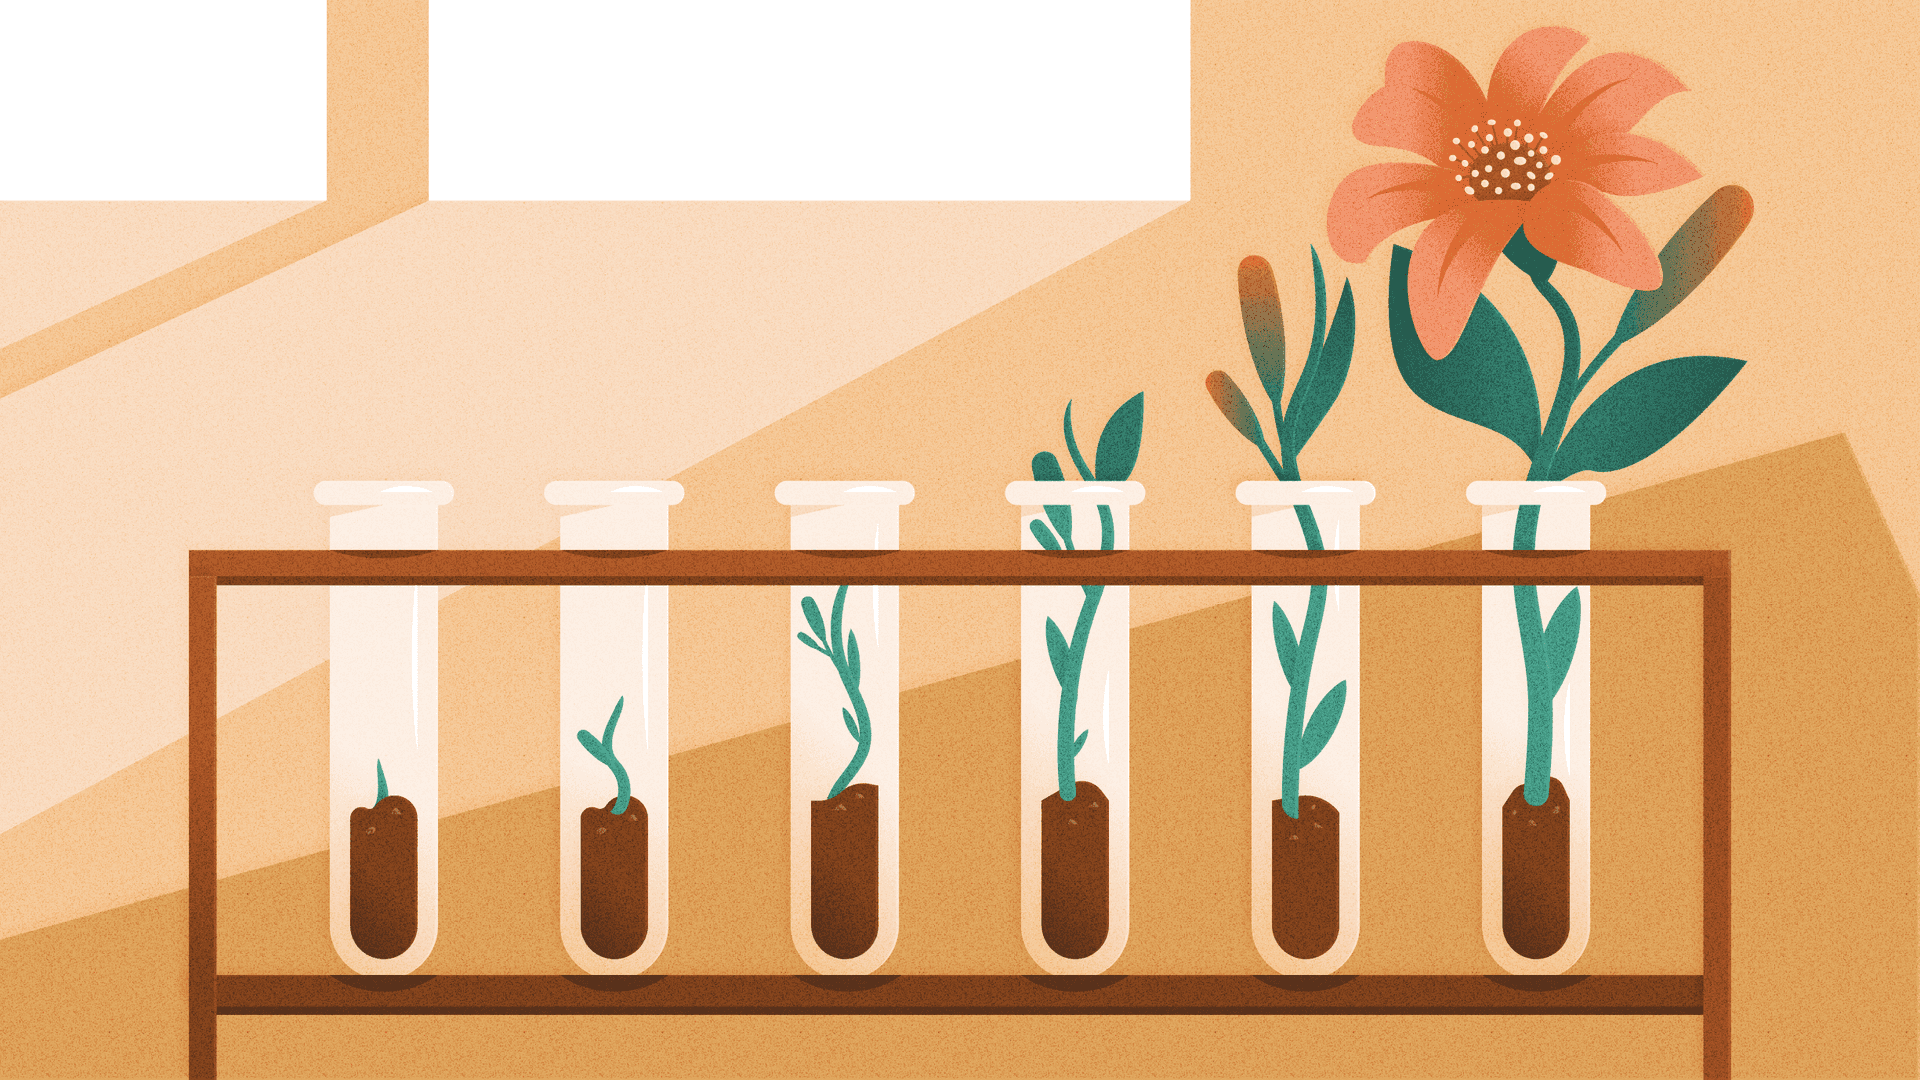 A rack of six test tubes contains plants at different growth stages, developing from a seedling on the left into a flower on the right.